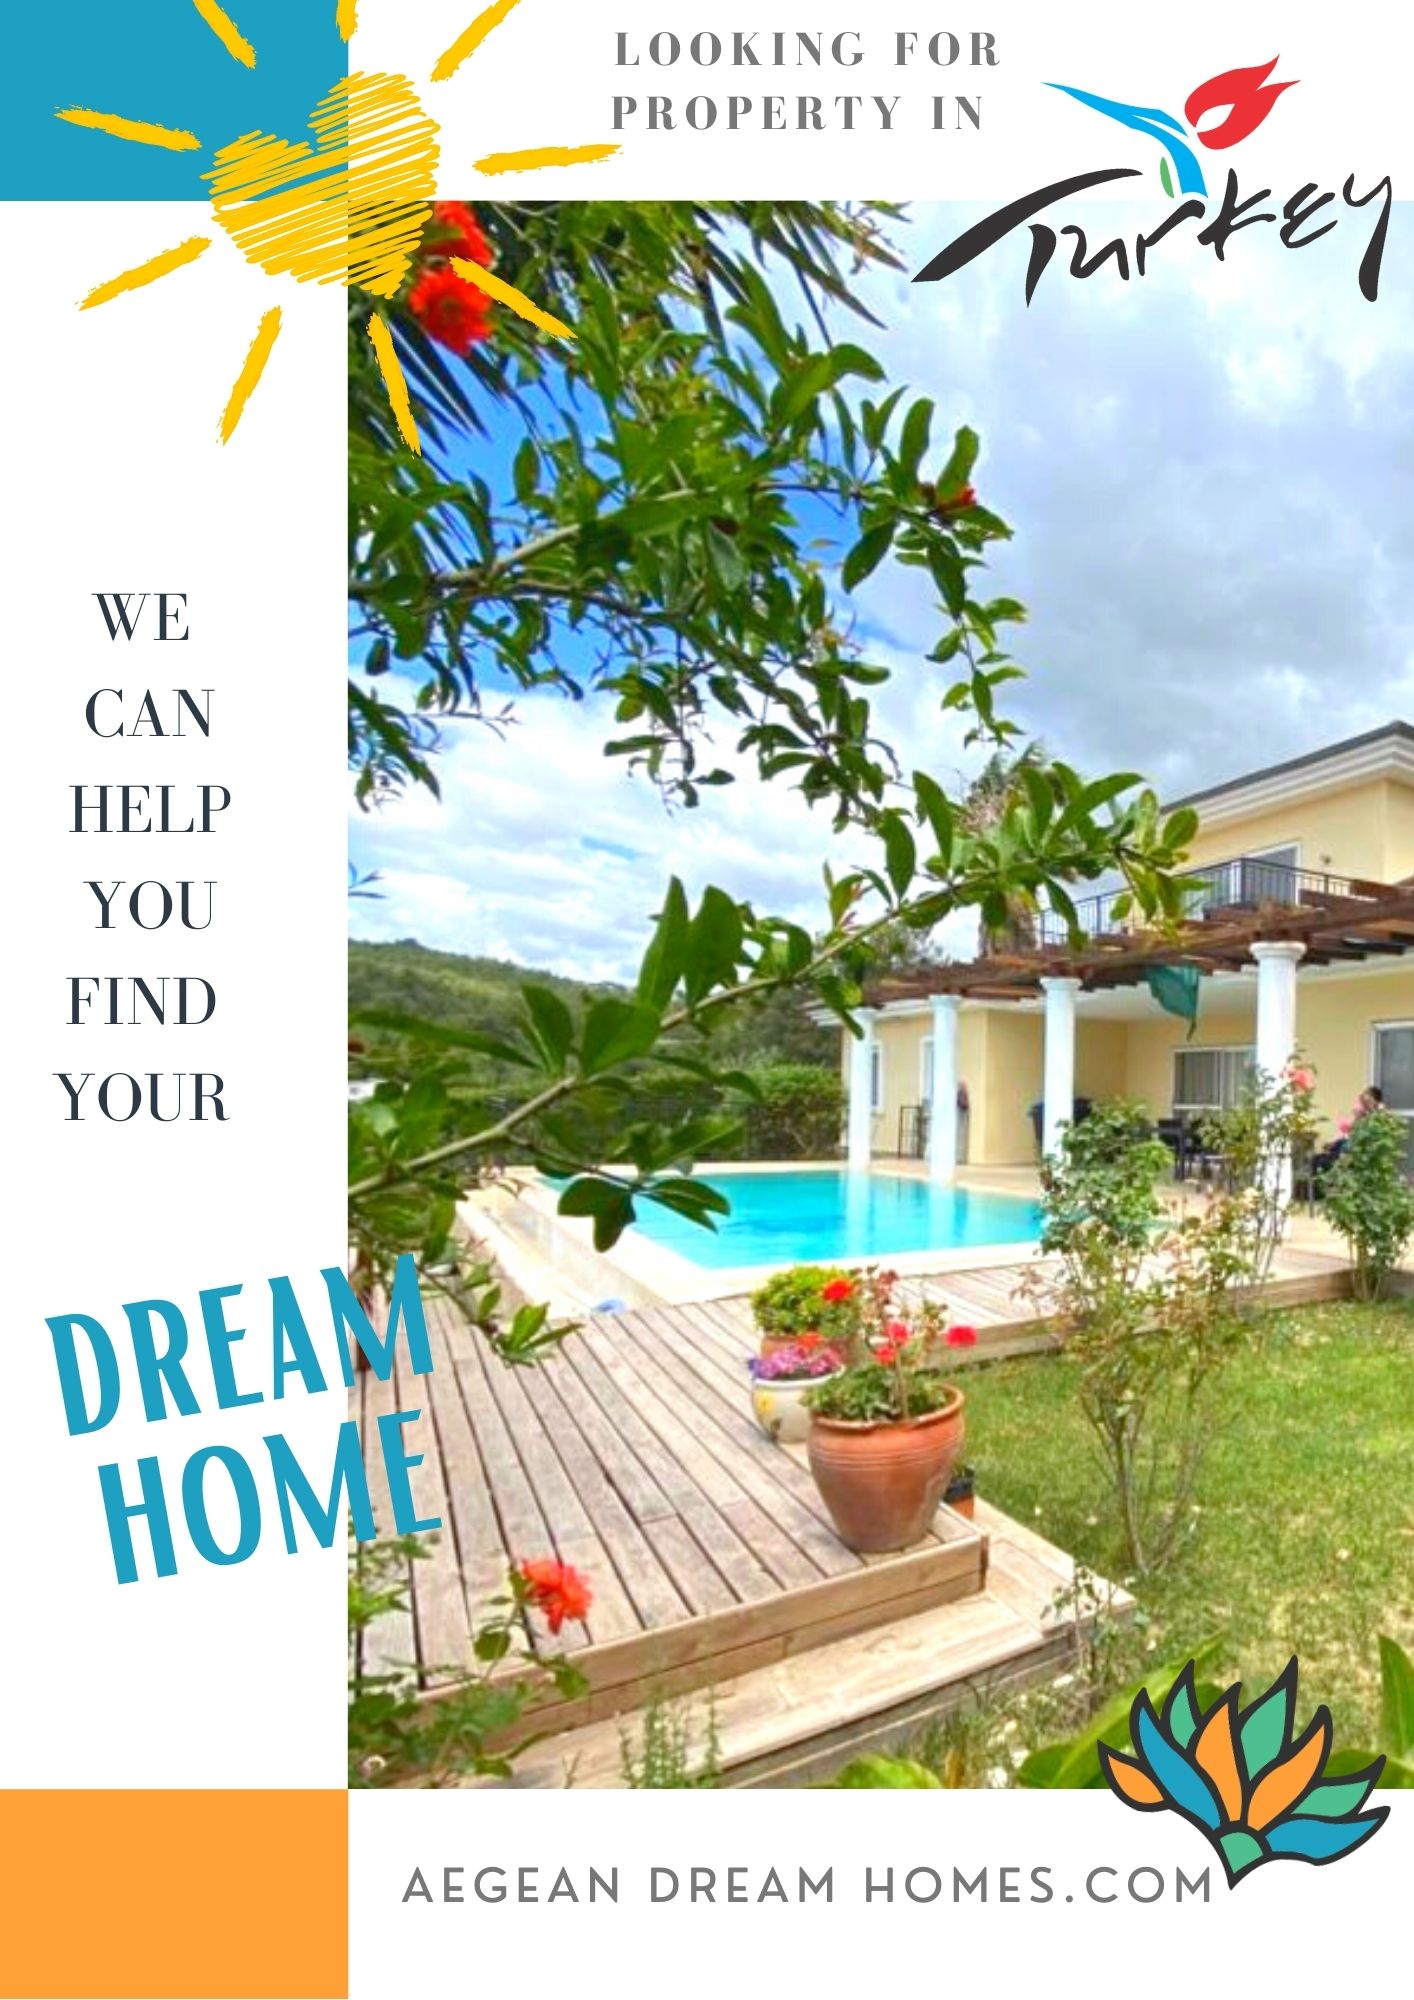 Aegean Dream Homes: Turkish Estate Agent Banner. Picture shows Kuşadası villa and pool. Text overlay reads: Looking For Property In Turkey? We can help you find your dream home. Aegean Dream Homes.com